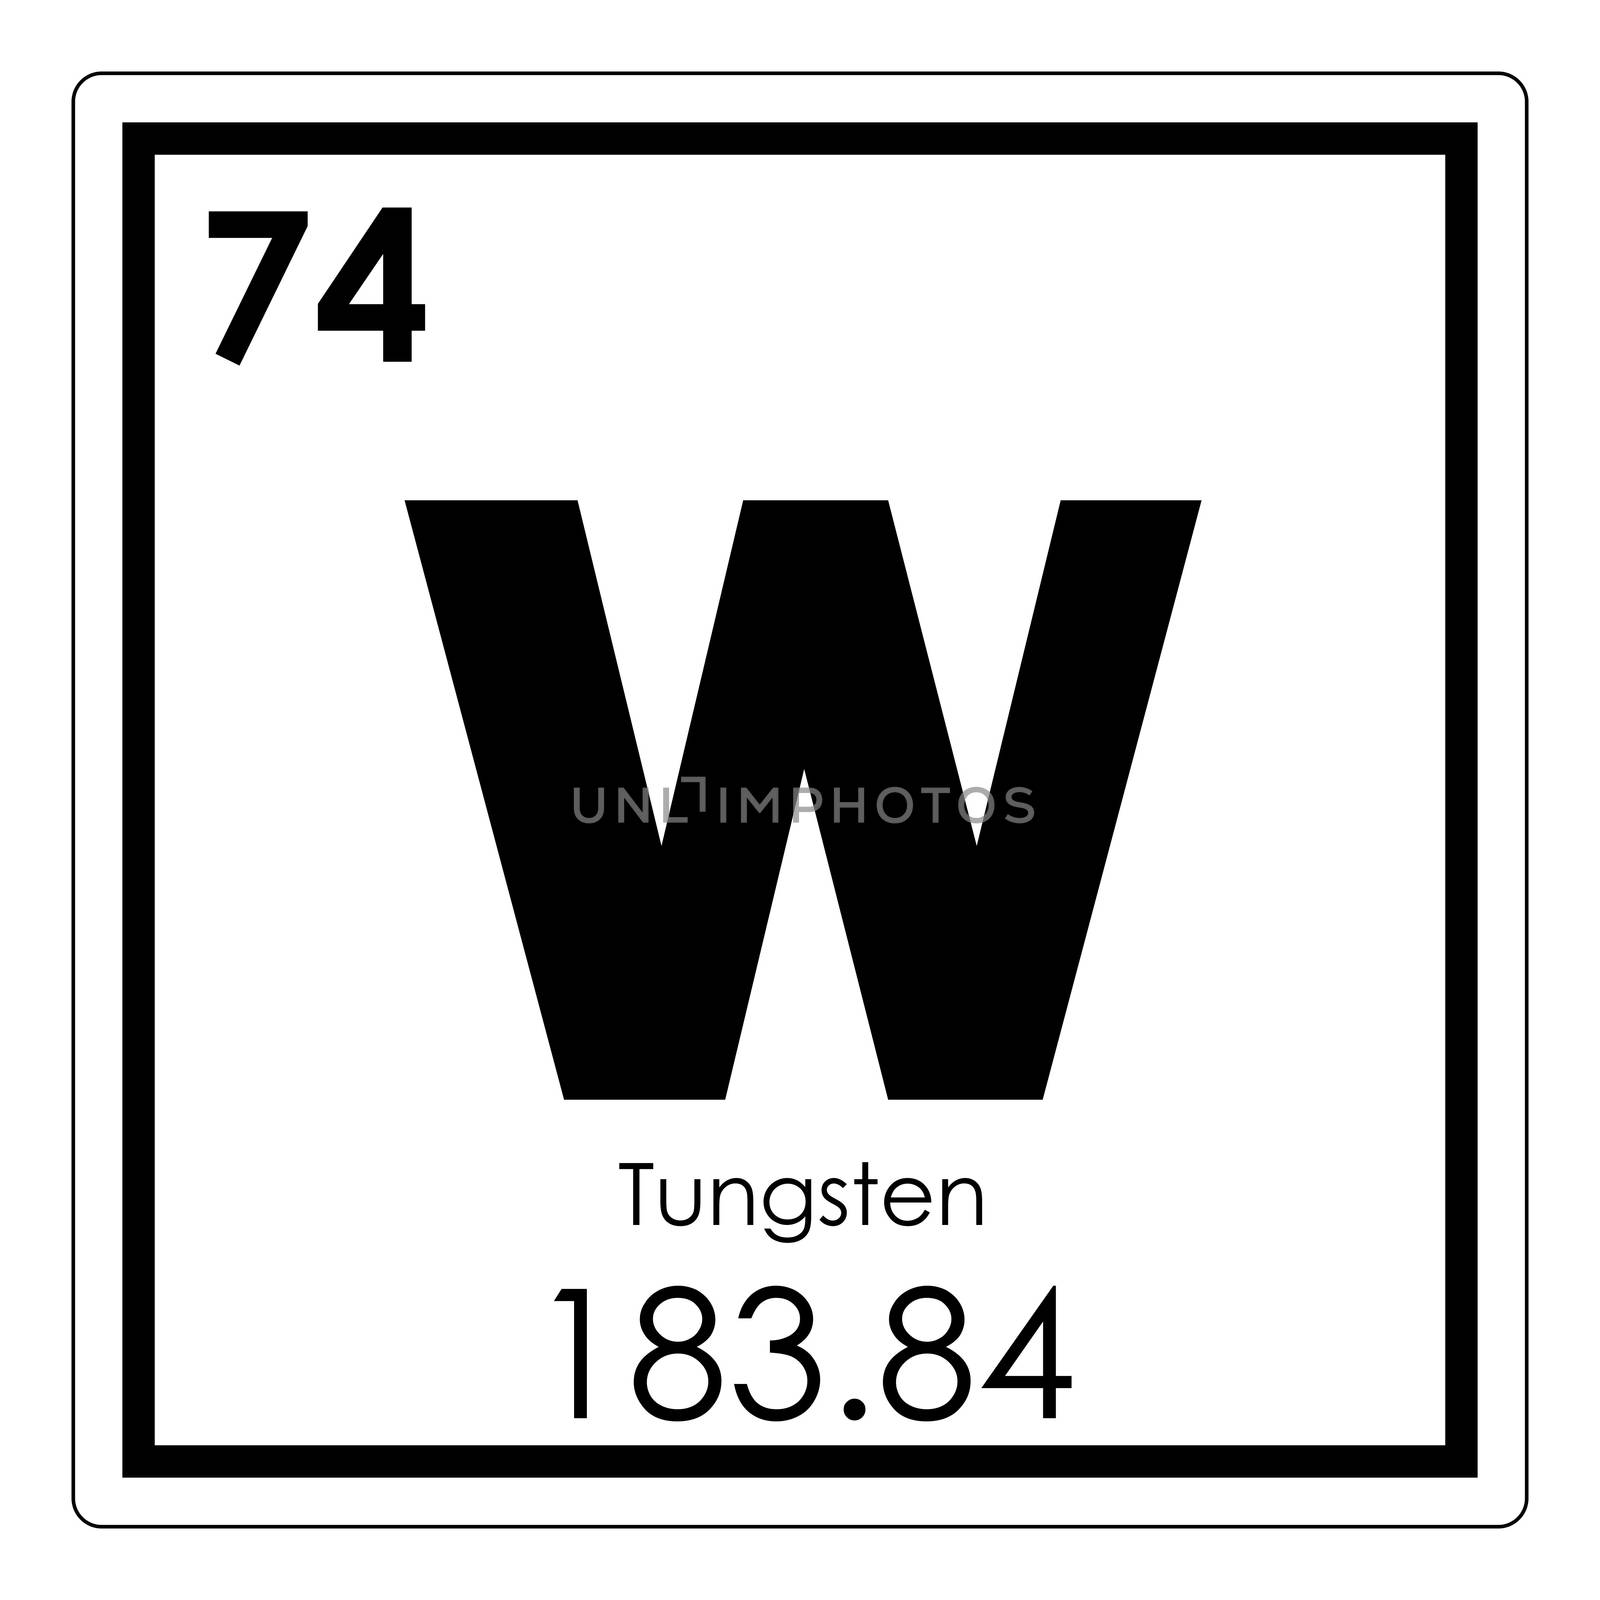 Tungsten chemical element by tony4urban